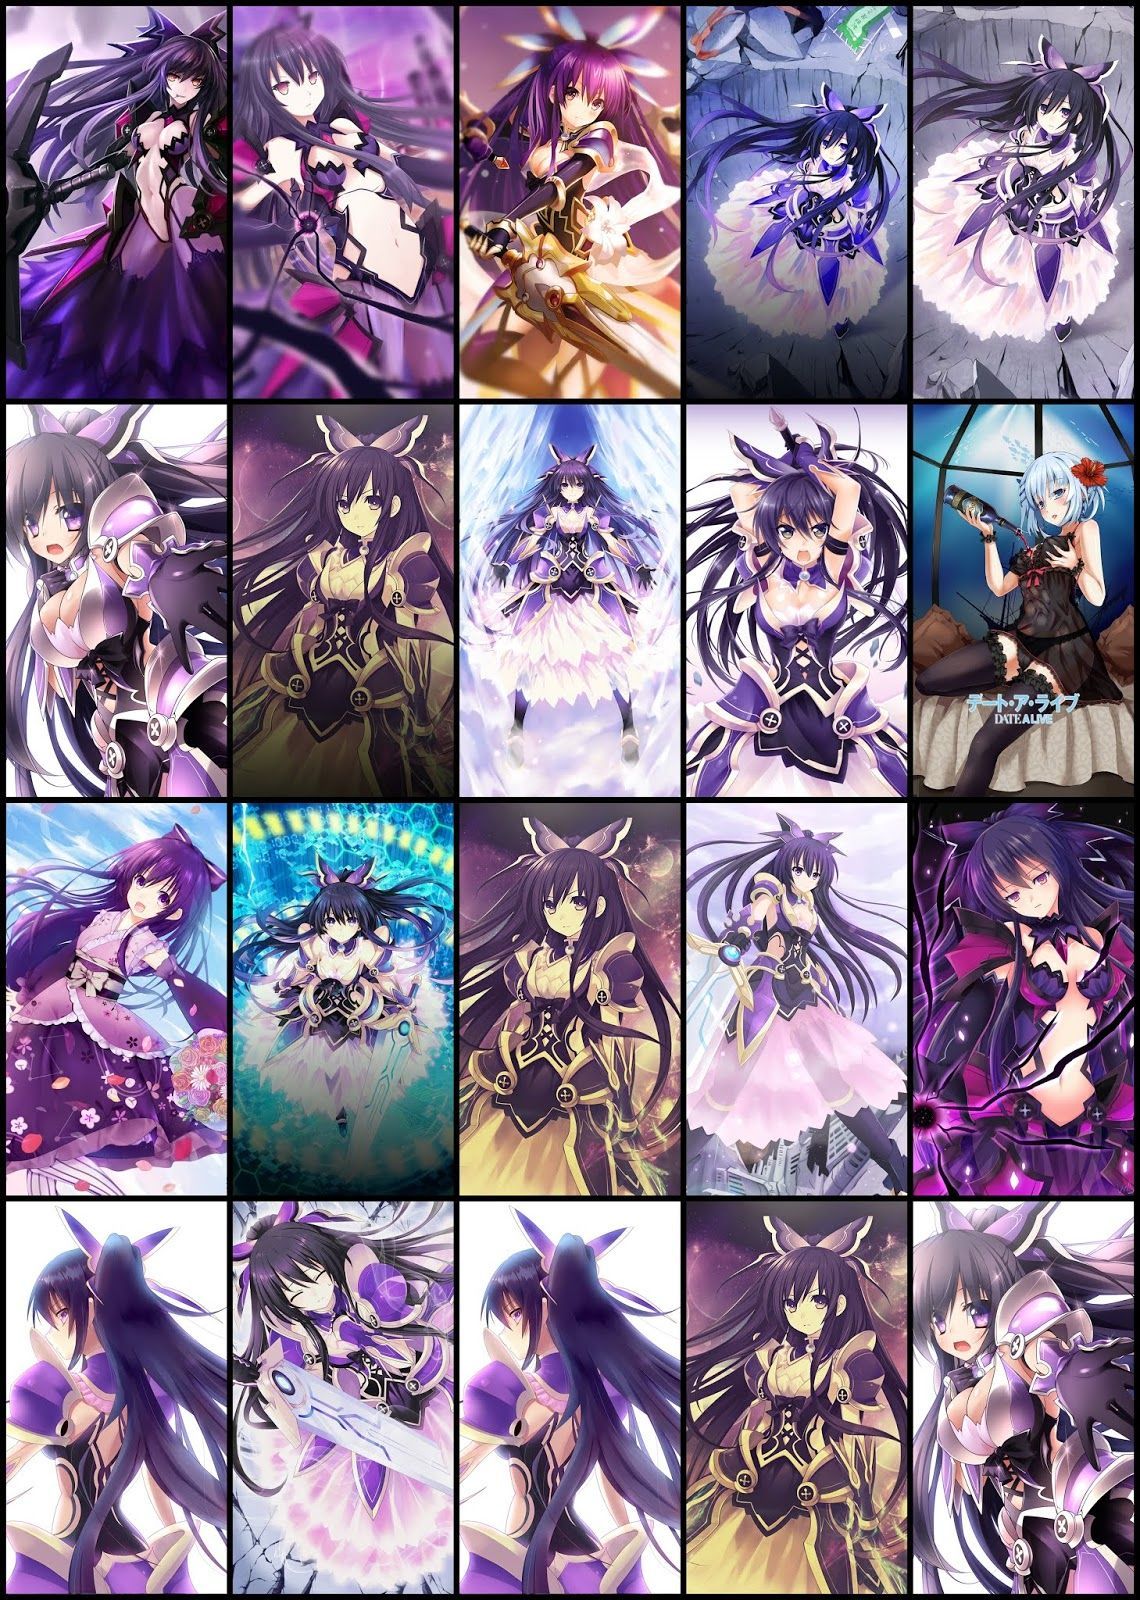 Date a Live (Tohka Yatogami) Wallpaper For Mobile Phone (Part